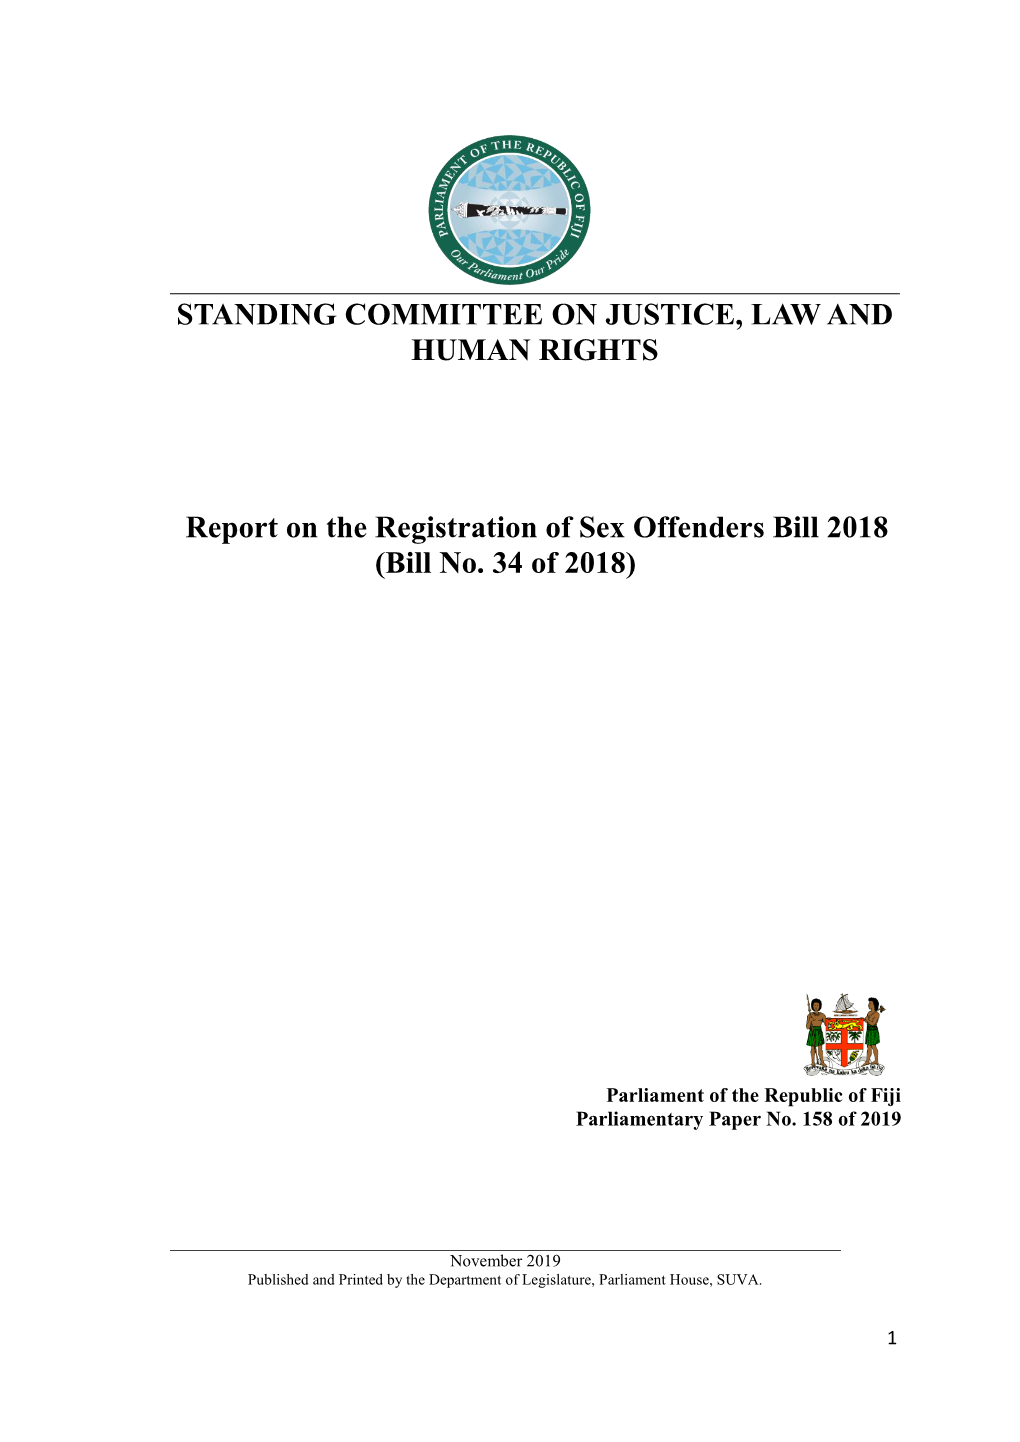 Report on the Registration of Sex Offenders Bill 2018 (Bill No